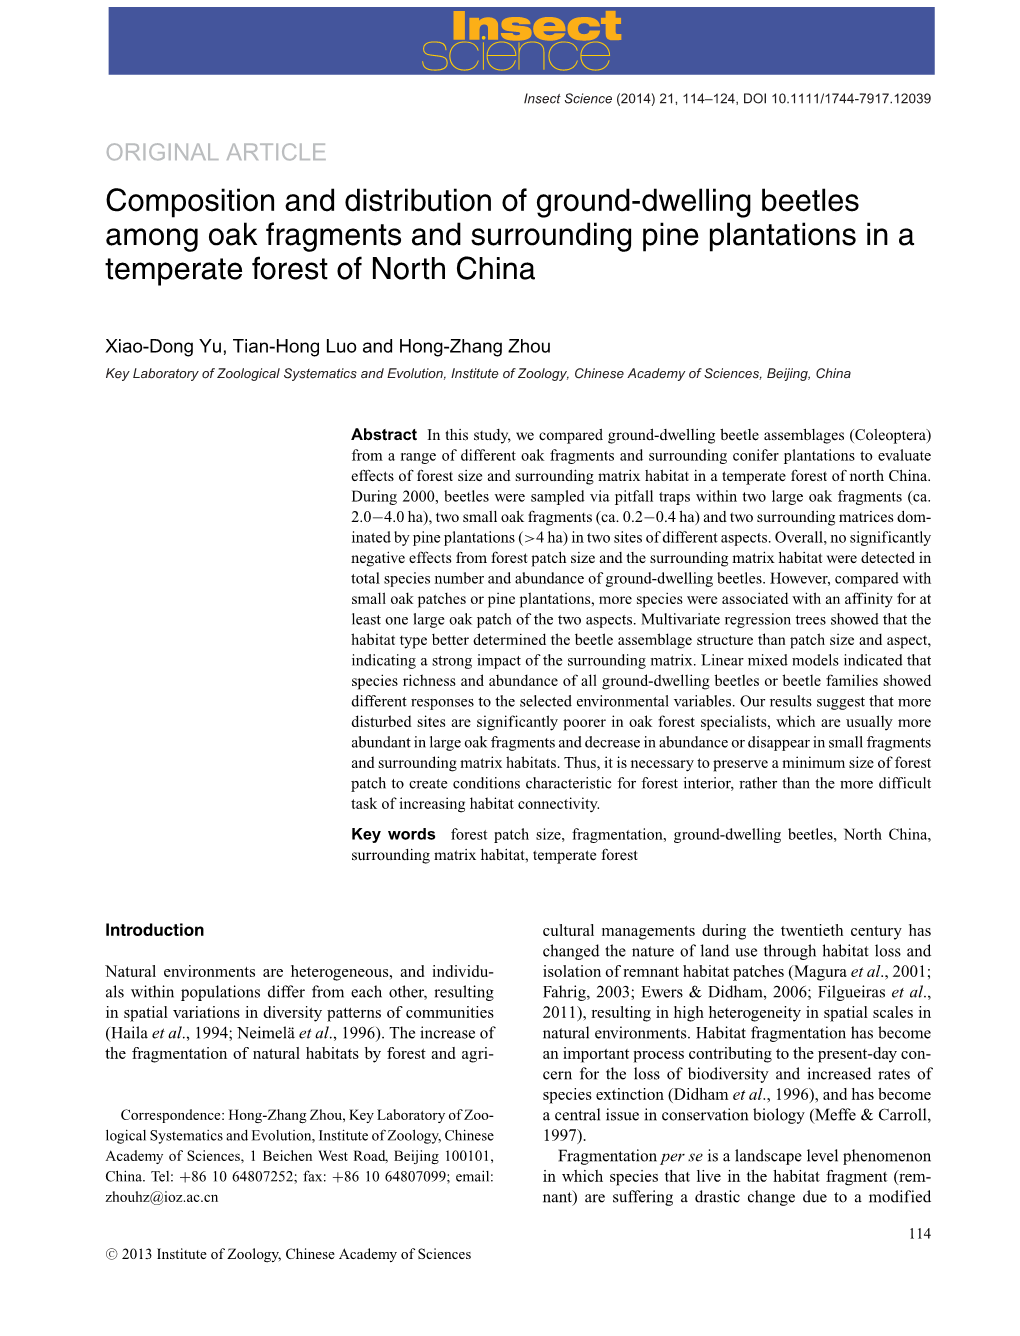 Composition and Distribution of Grounddwelling Beetles Among Oak